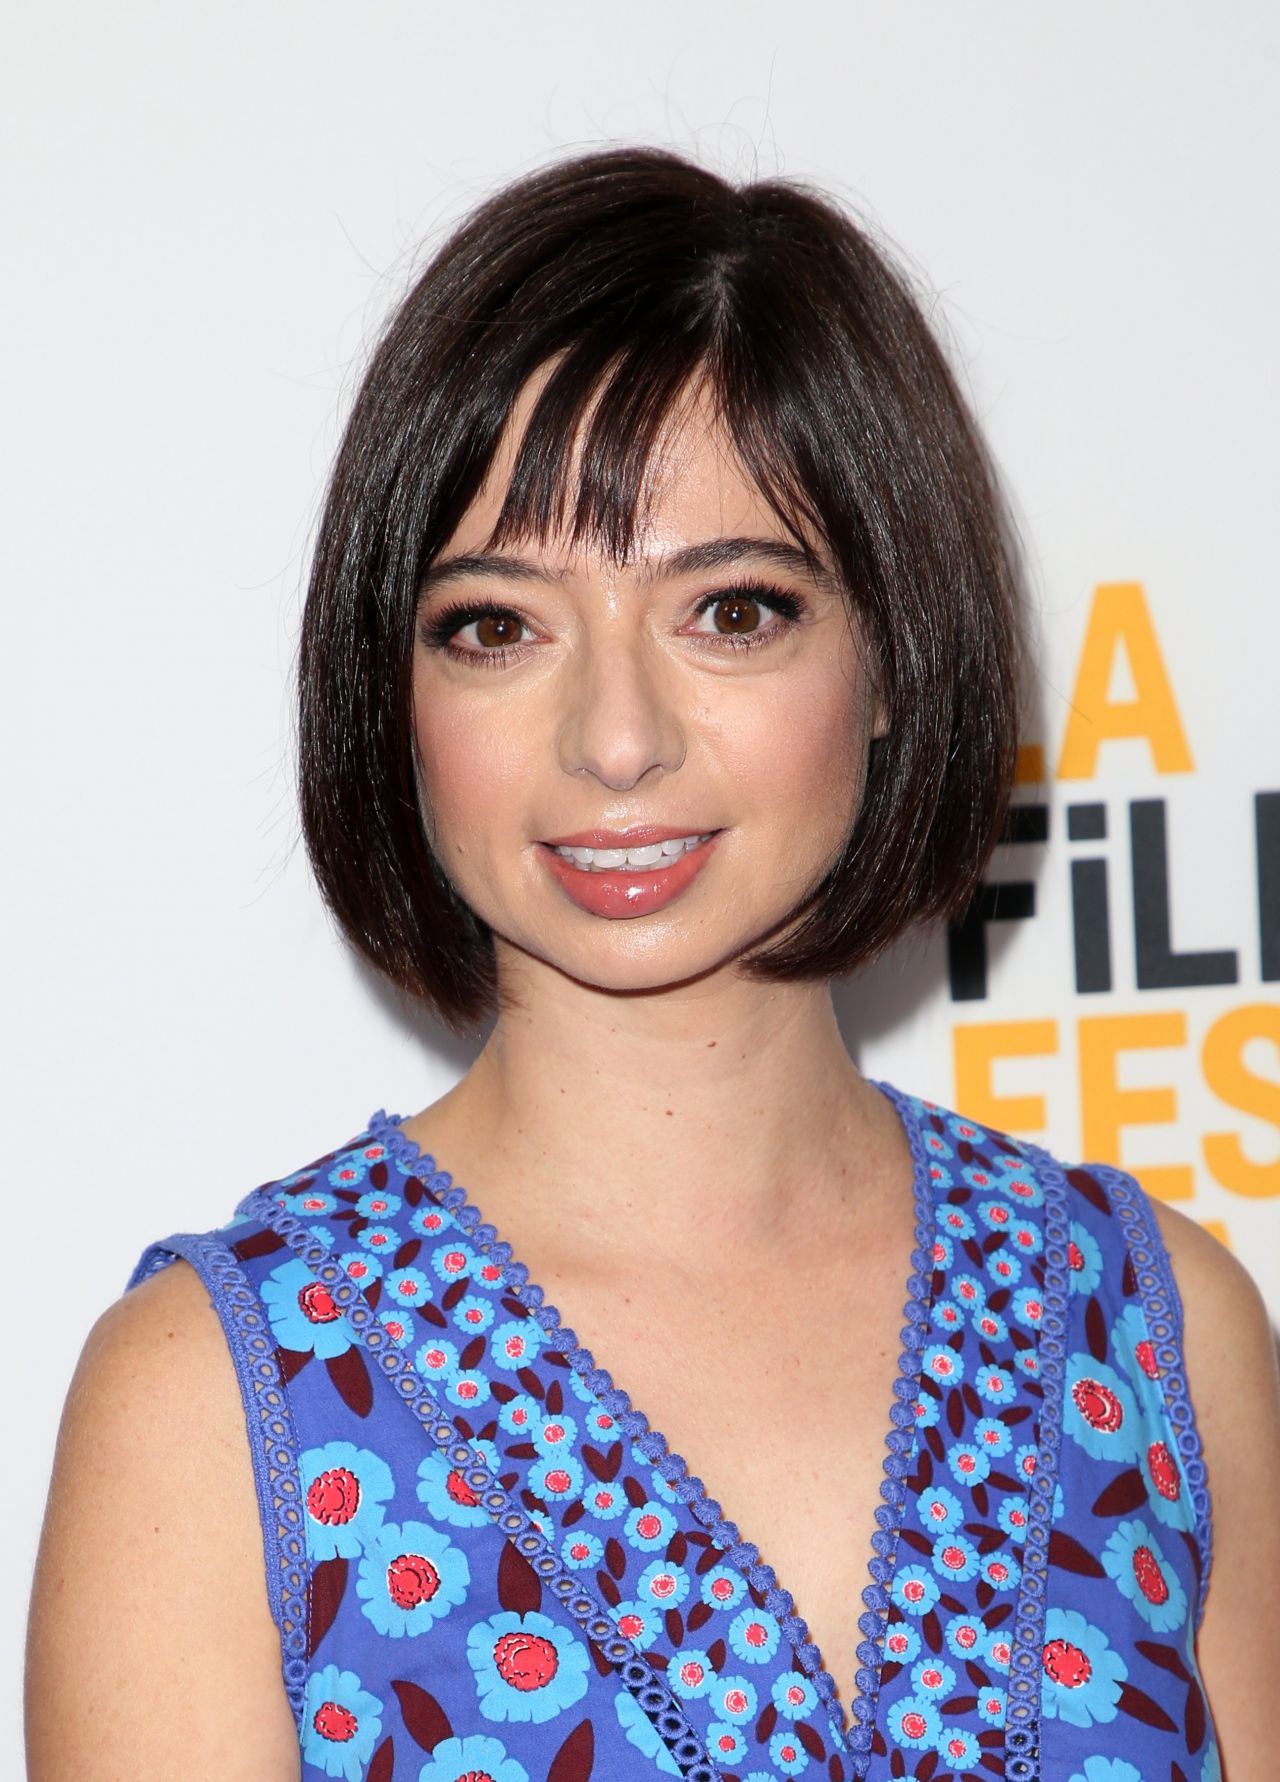 Maestro Landmand frugtbart Kate Micucci - "The Little Hours" Screening in Culver City 06/19/2017 •  CelebMafia